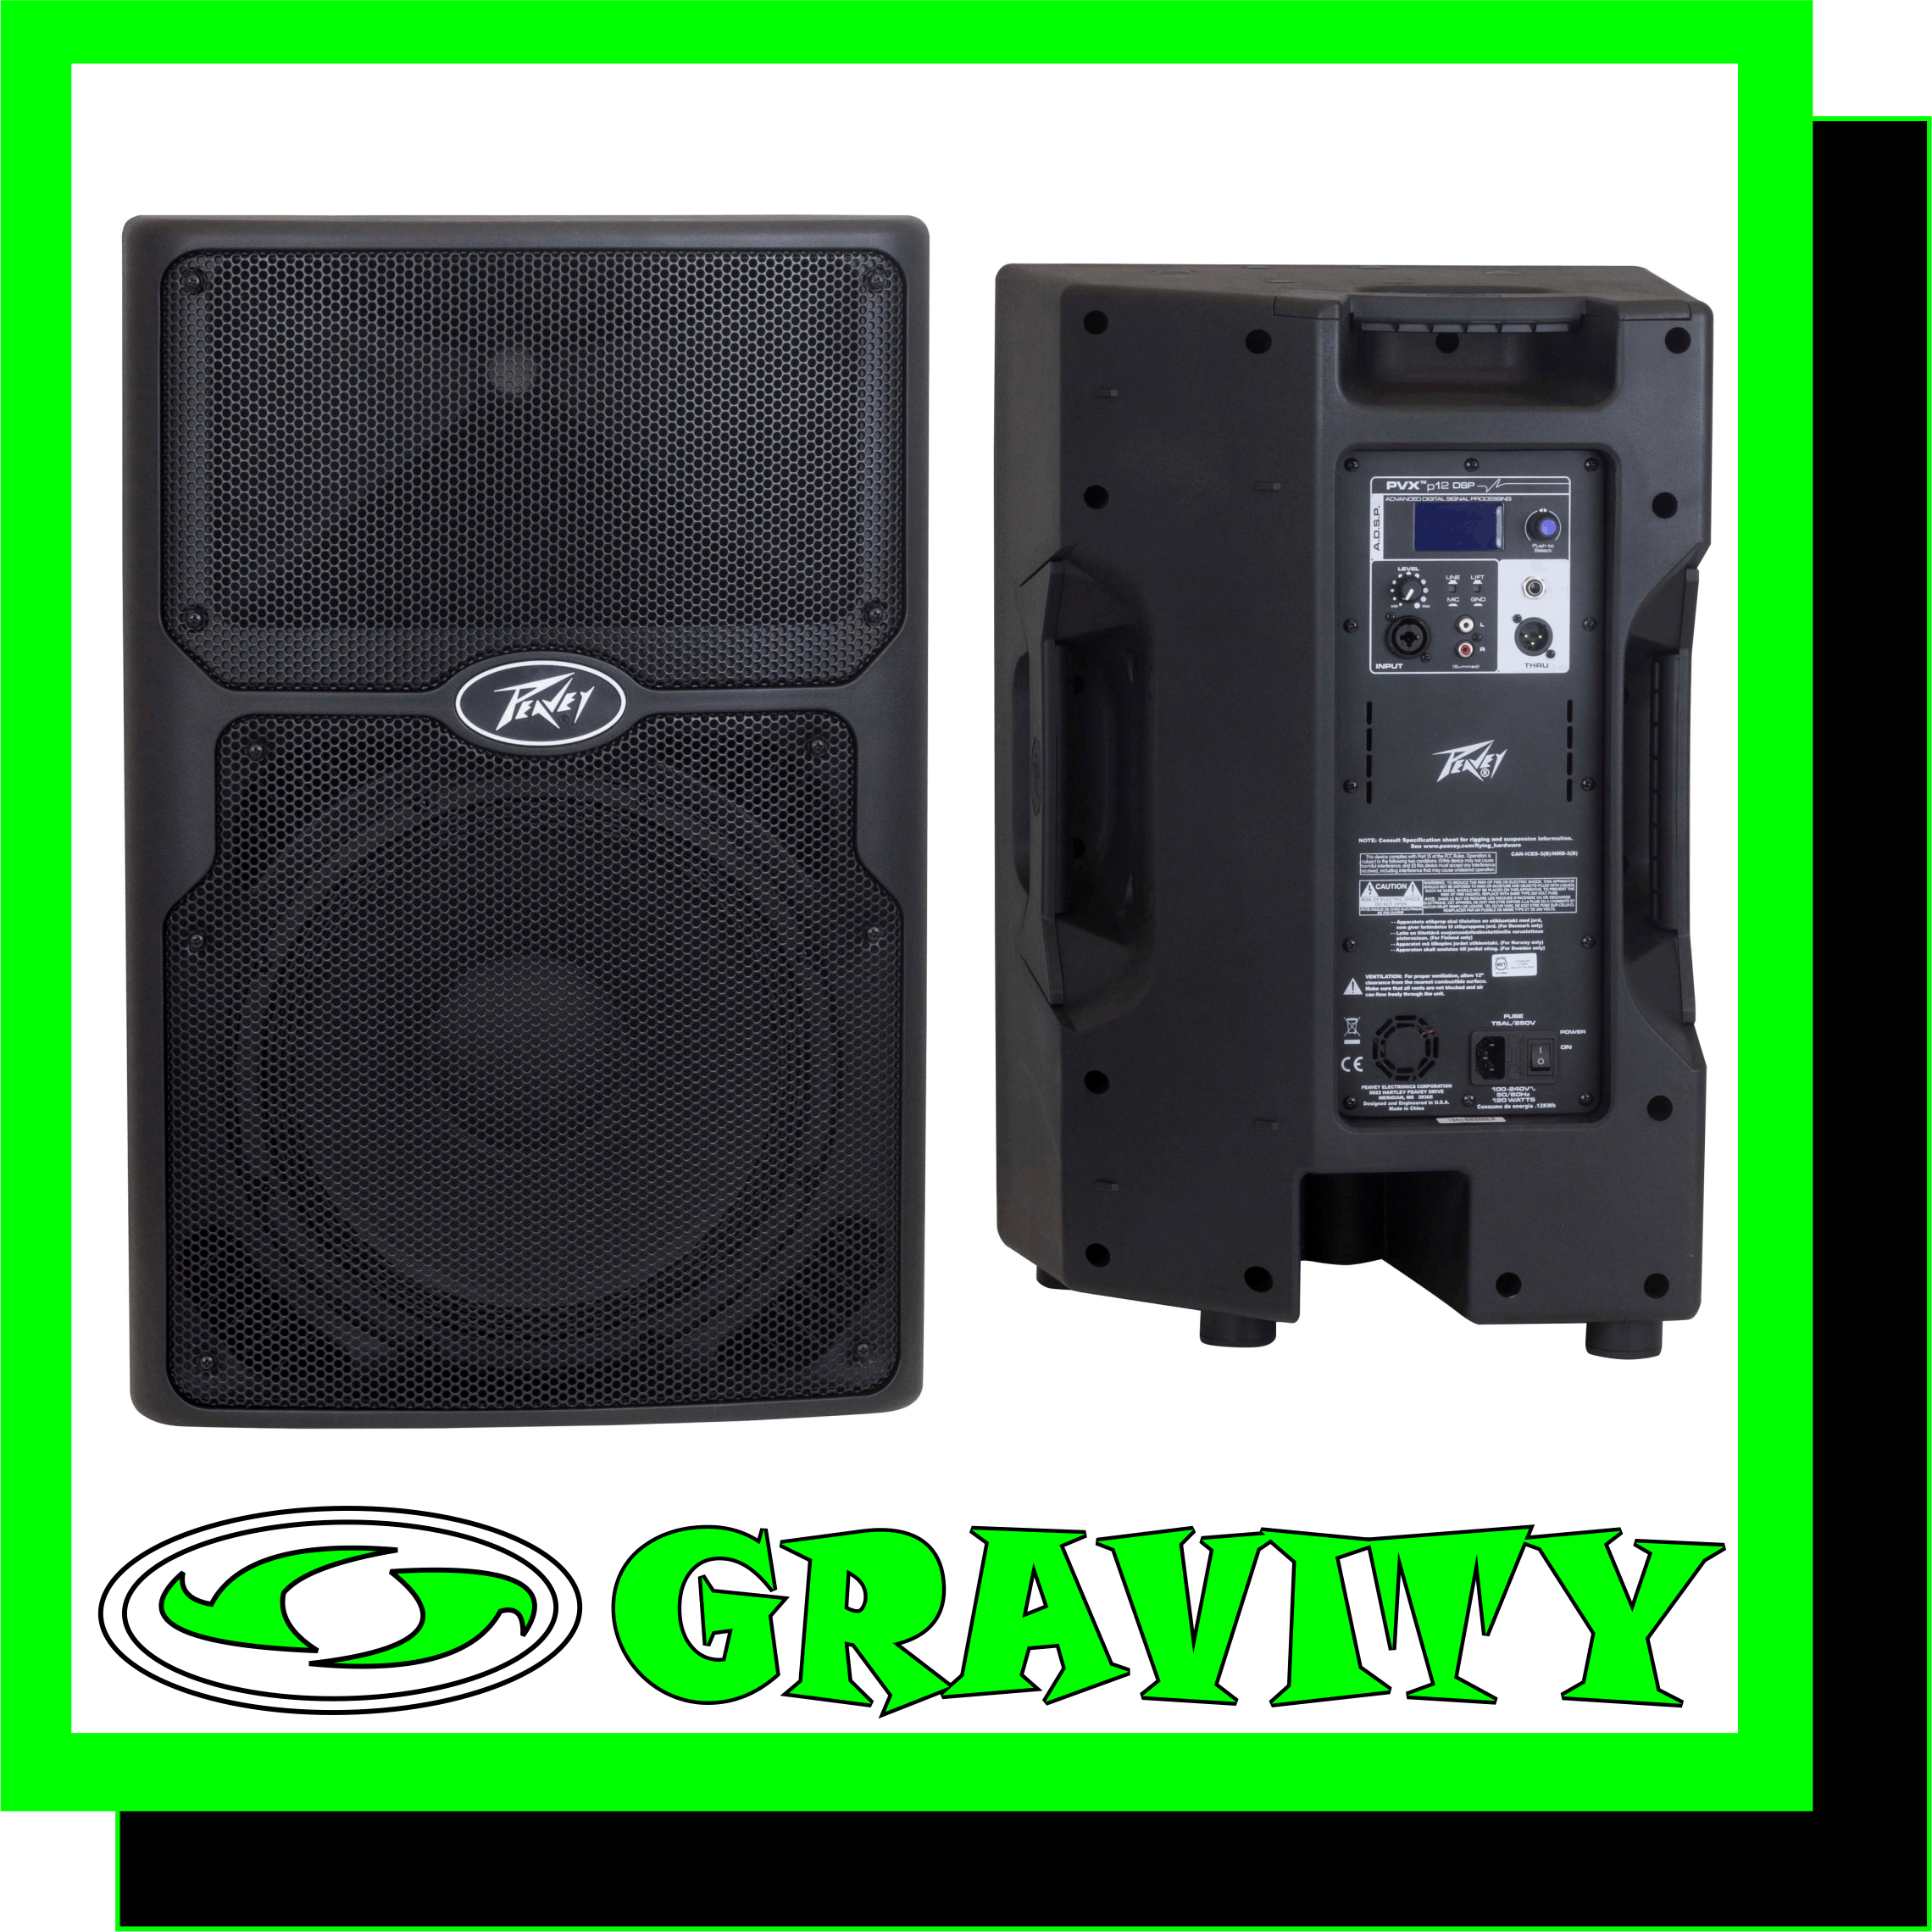 The PVXp™ 12 DSP features a reliable bi-amped power section that provides a total of 830 Watts of peak available dynamic power. With that much available power, speaker protection is critical. Advanced digital signal compression prevents audible overload, protecting the speakers from harmful distortion at high output levels. This powered enclosure also includes heavy duty speaker drivers; it features a 12" woofer with a 2-3/8" voice coil and a 50 oz. magnet. This is coupled with the RX14 compression driver that includes a 1.4" titanium diaphragm on a 100-degree horizontal x 50 degree vertical pattern asymmetrical horn.  The PVXp™ 12 DSP provides a balanced input via a combination jack that accepts a balanced TRS 1/4" input, as well as a balanced XLR input and summed RCA jacks. There are two balanced Thru outputs, a male XLR and a 1/4" TRS. The LCD display and EQ presets, along with other operating parameters are accessed via a one-knob selector.  Features -Two-way bi-amplified analog amp powered speaker system -DSP I/O is at 48 kHz and 24 bits, with low-jitter, professional grade components -Fan cooled for maximum reliability -Peavey Exclusive Quadratic Throat Waveguide™ technology, 100 by 50 degree coverage -DSP processing is 64 bit double-precision -Input is via a combo female XLR and 1/4" TRS phone jack with balanced input -A Mic/Line switch provides for two different gain settings -Thru output is via a male XLR jack and 1/4" TRS phone jack -Multiple Factory Preset EQ settings -Rugged plastic injection-molded trapezoidal enclosure -630 watts peak dynamic woofer power, 200 watts peak dynamic tweeter power -Full-coverage perforated steel grille, with powder coat finish -RX™ 14 compression driver, with 1.4 inch titanium diaphragm -Pole mount molded-in for 1 3/8" diameter poles -12" heavy-duty woofer with a 2-3/8" voice coil & 50 oz. magnet -Top, bottom and right side flying point inserts -Asymmetrical horn aims the sound down 10 degrees, at the audience, not over their heads -Weight Unpacked: 42.00 lb(19.051 kg) -Weight Packed: 48.00 lb(21.772 kg) -Width Packed: 20"(50.8 cm) -Height Packed: 26.75"(67.945 cm) -Depth Packed: 18.25"(46.355 cm)